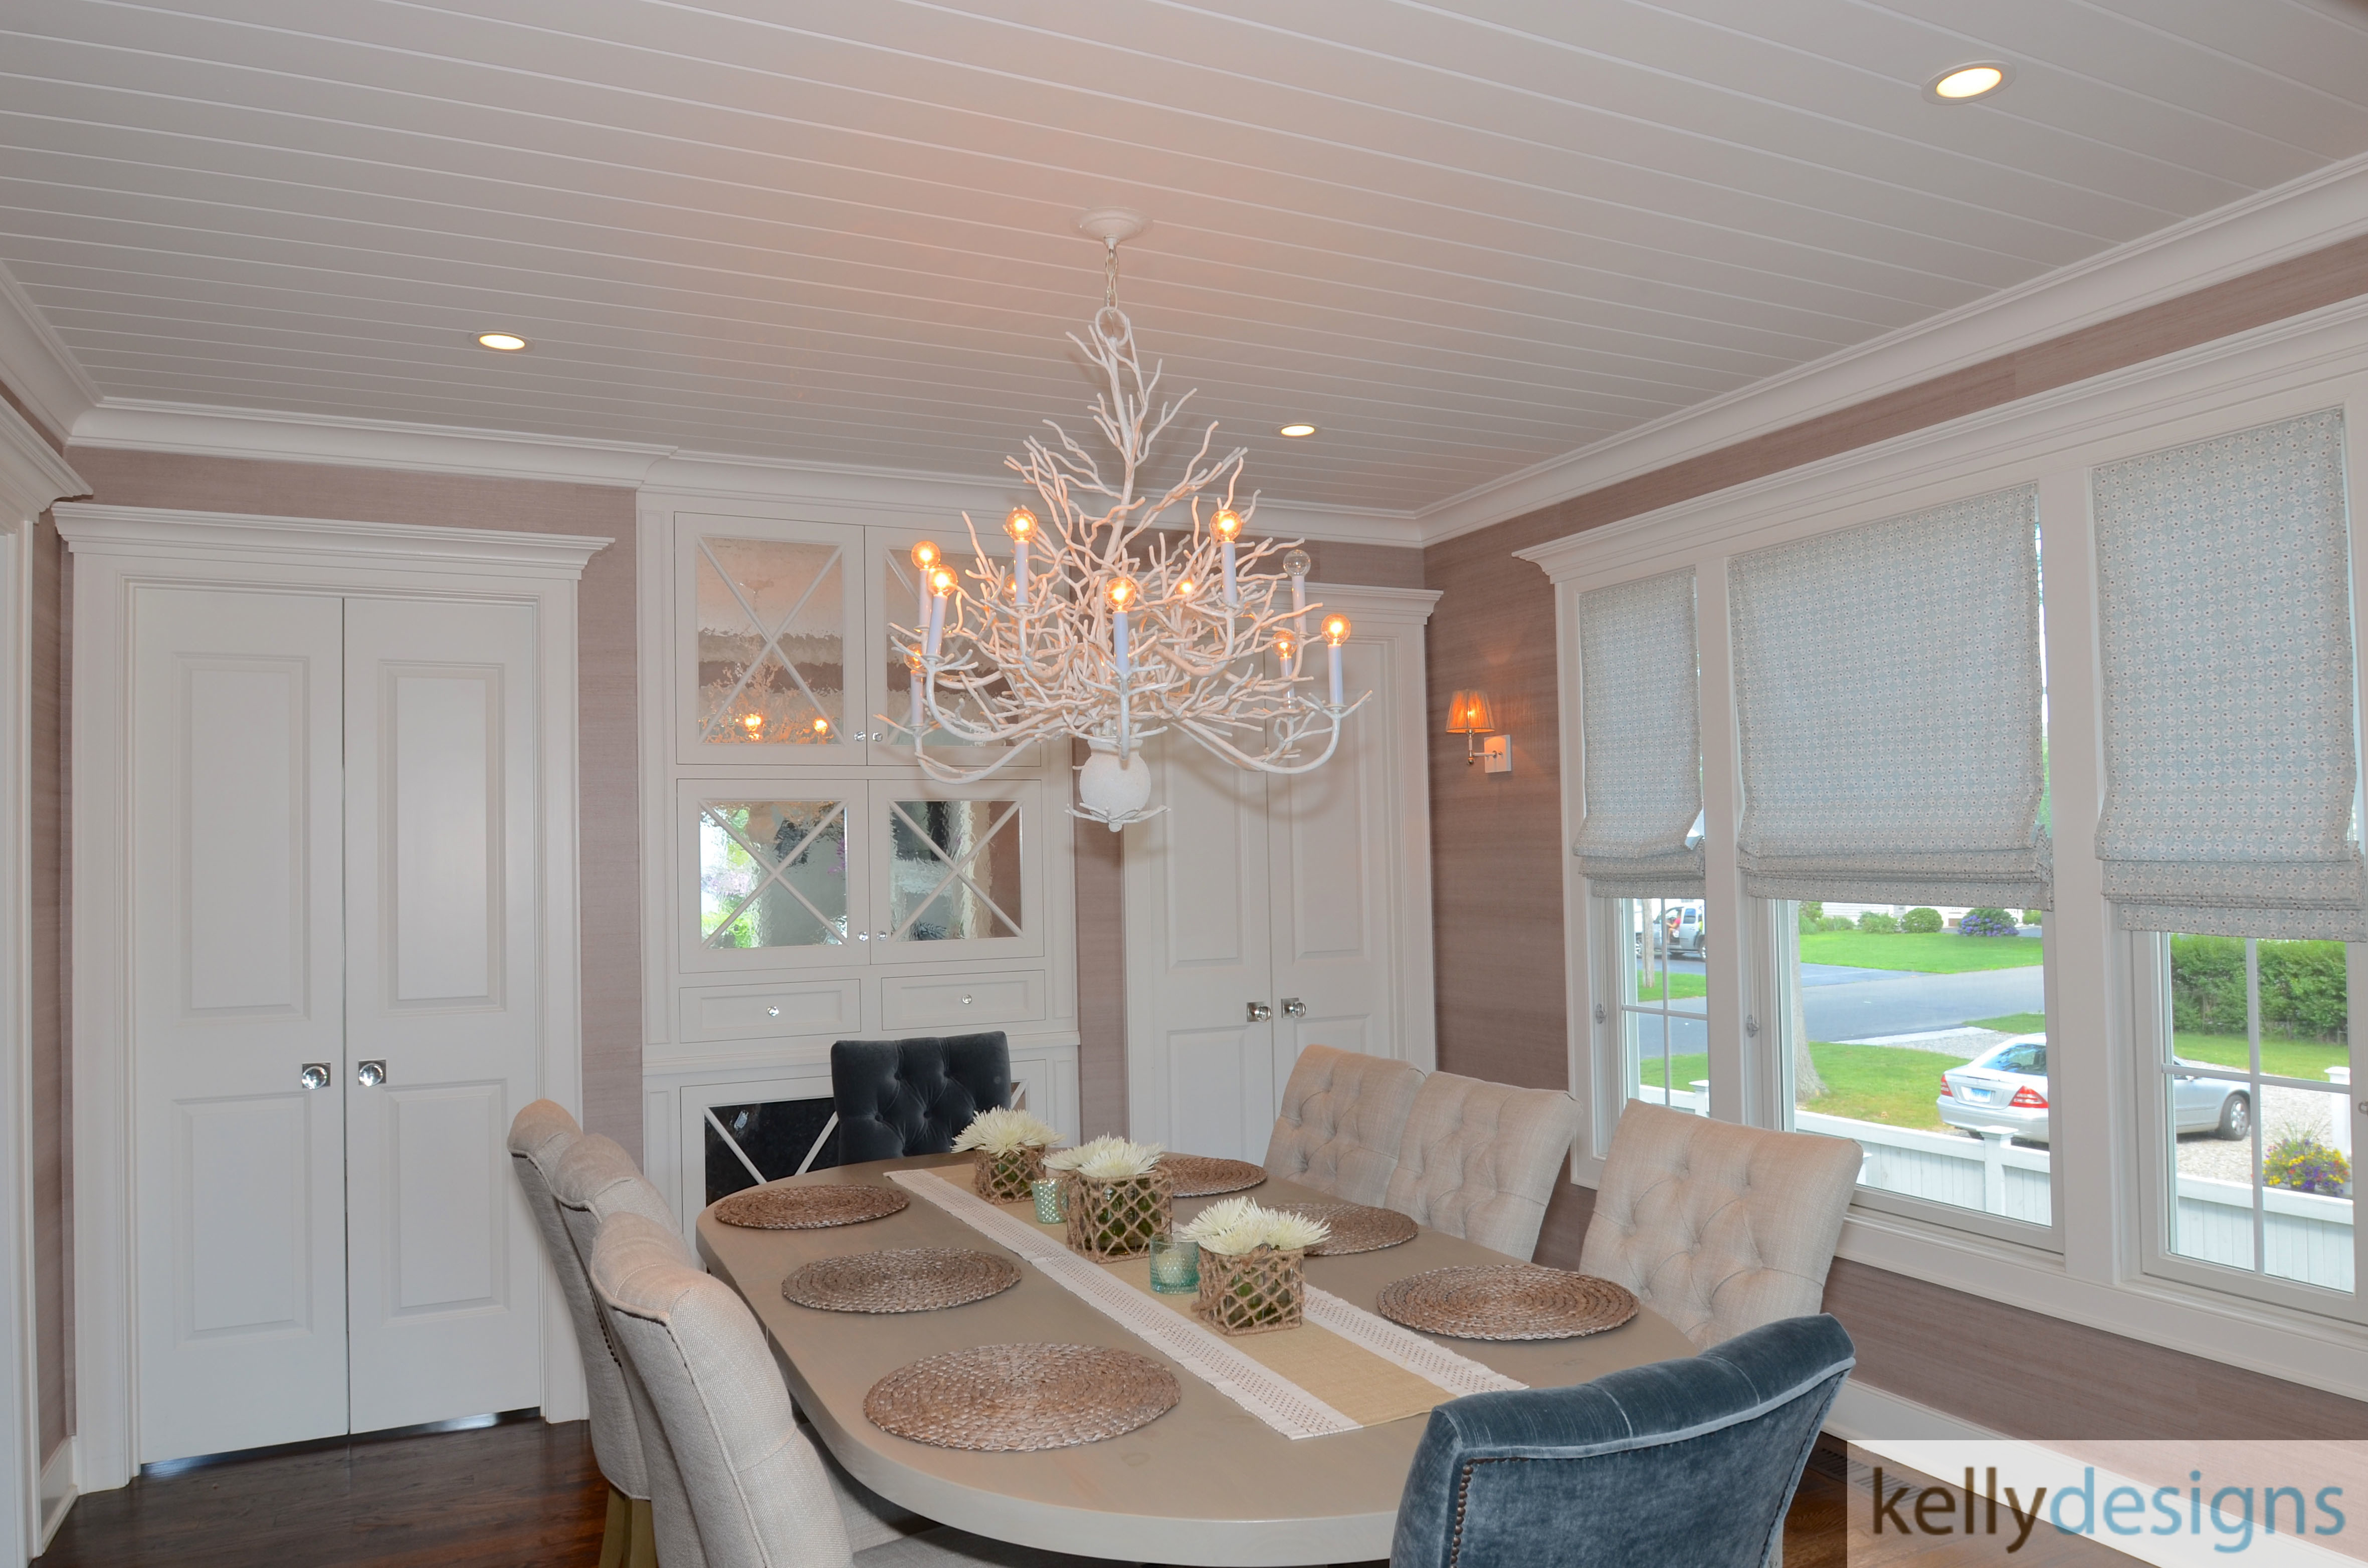 Beachside Bliss   Dining Room   Interior Design By Kellydesigns